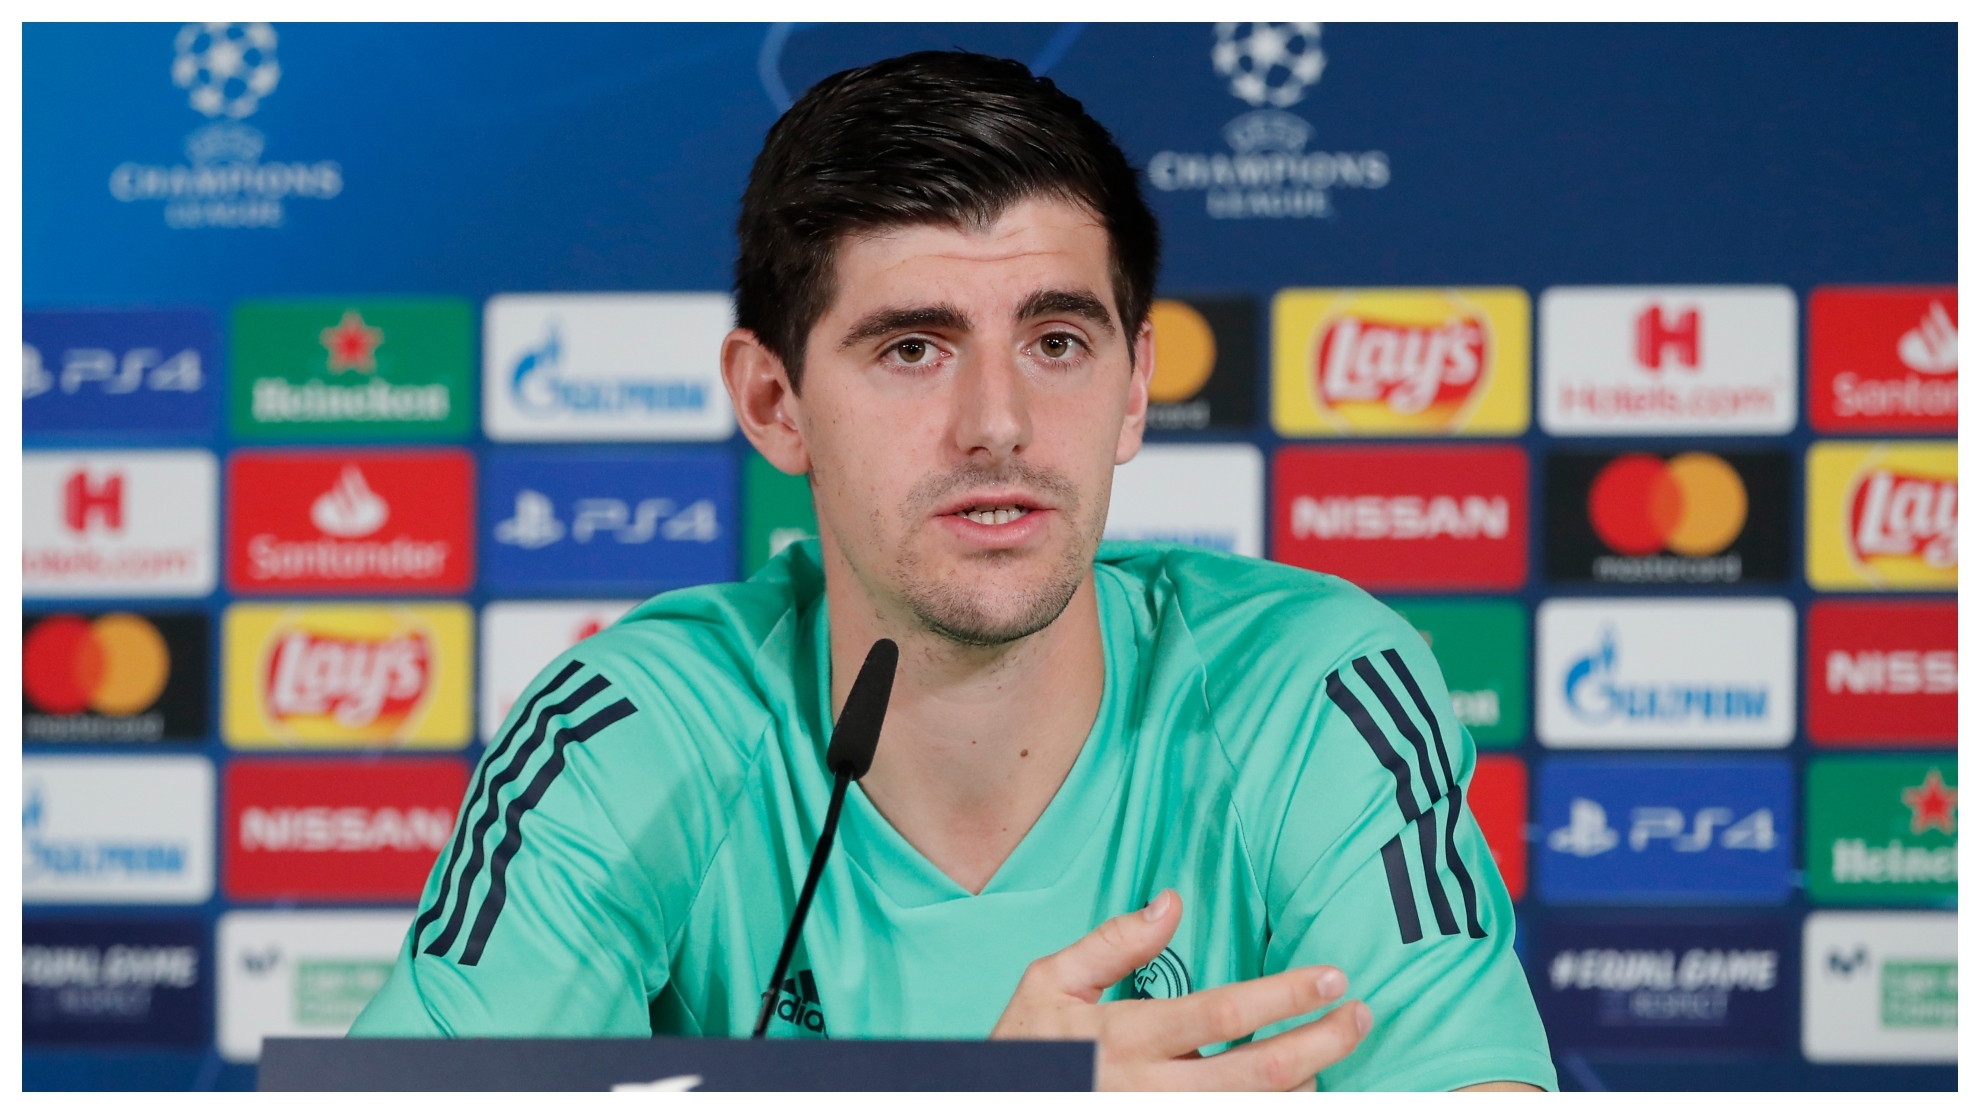 Courtois in a press conference